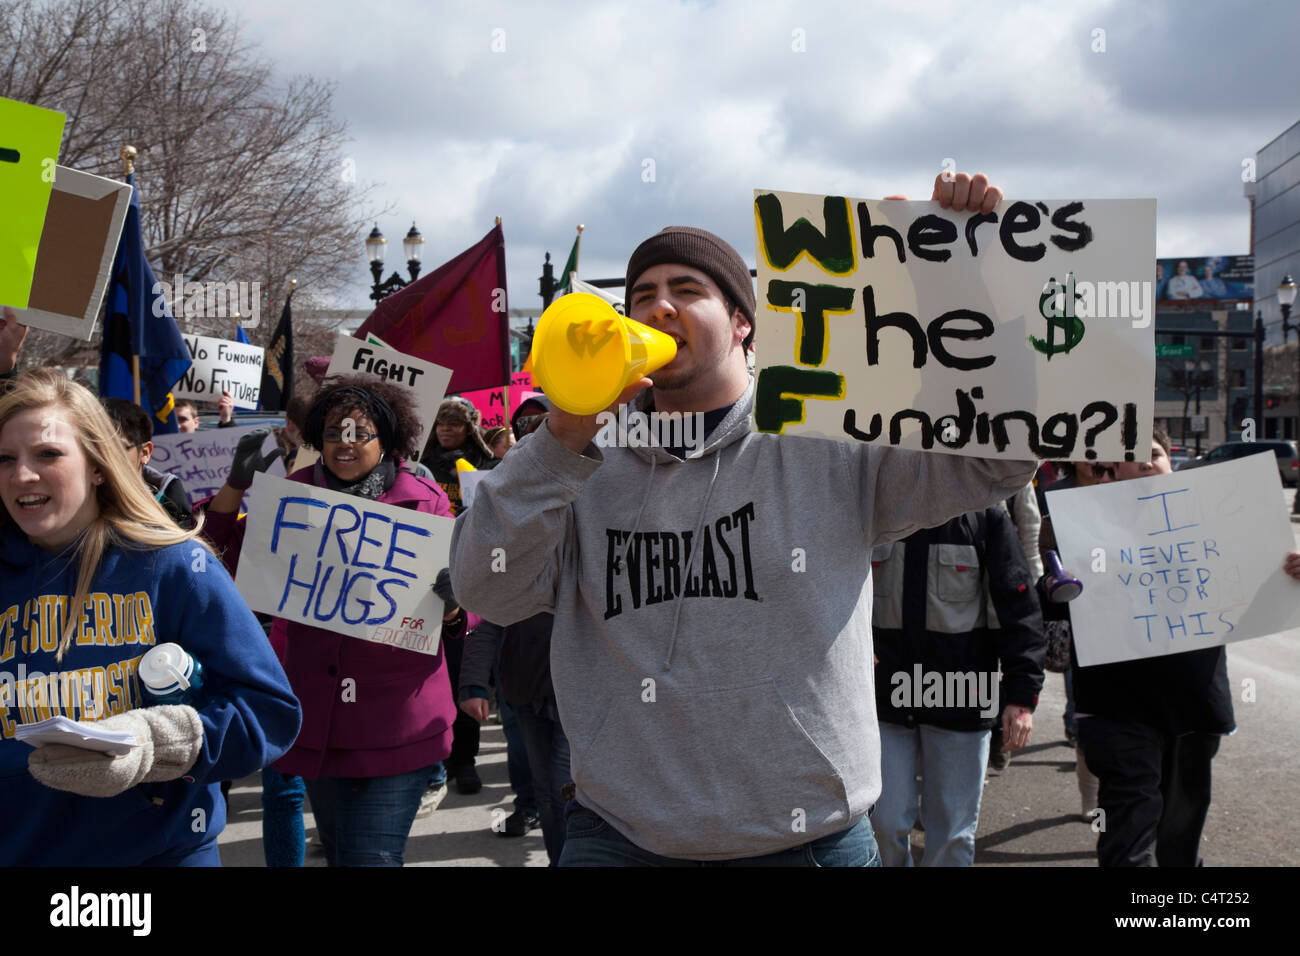 Students Rally Against Budget Cuts for Higher Education in Michigan Stock Photo